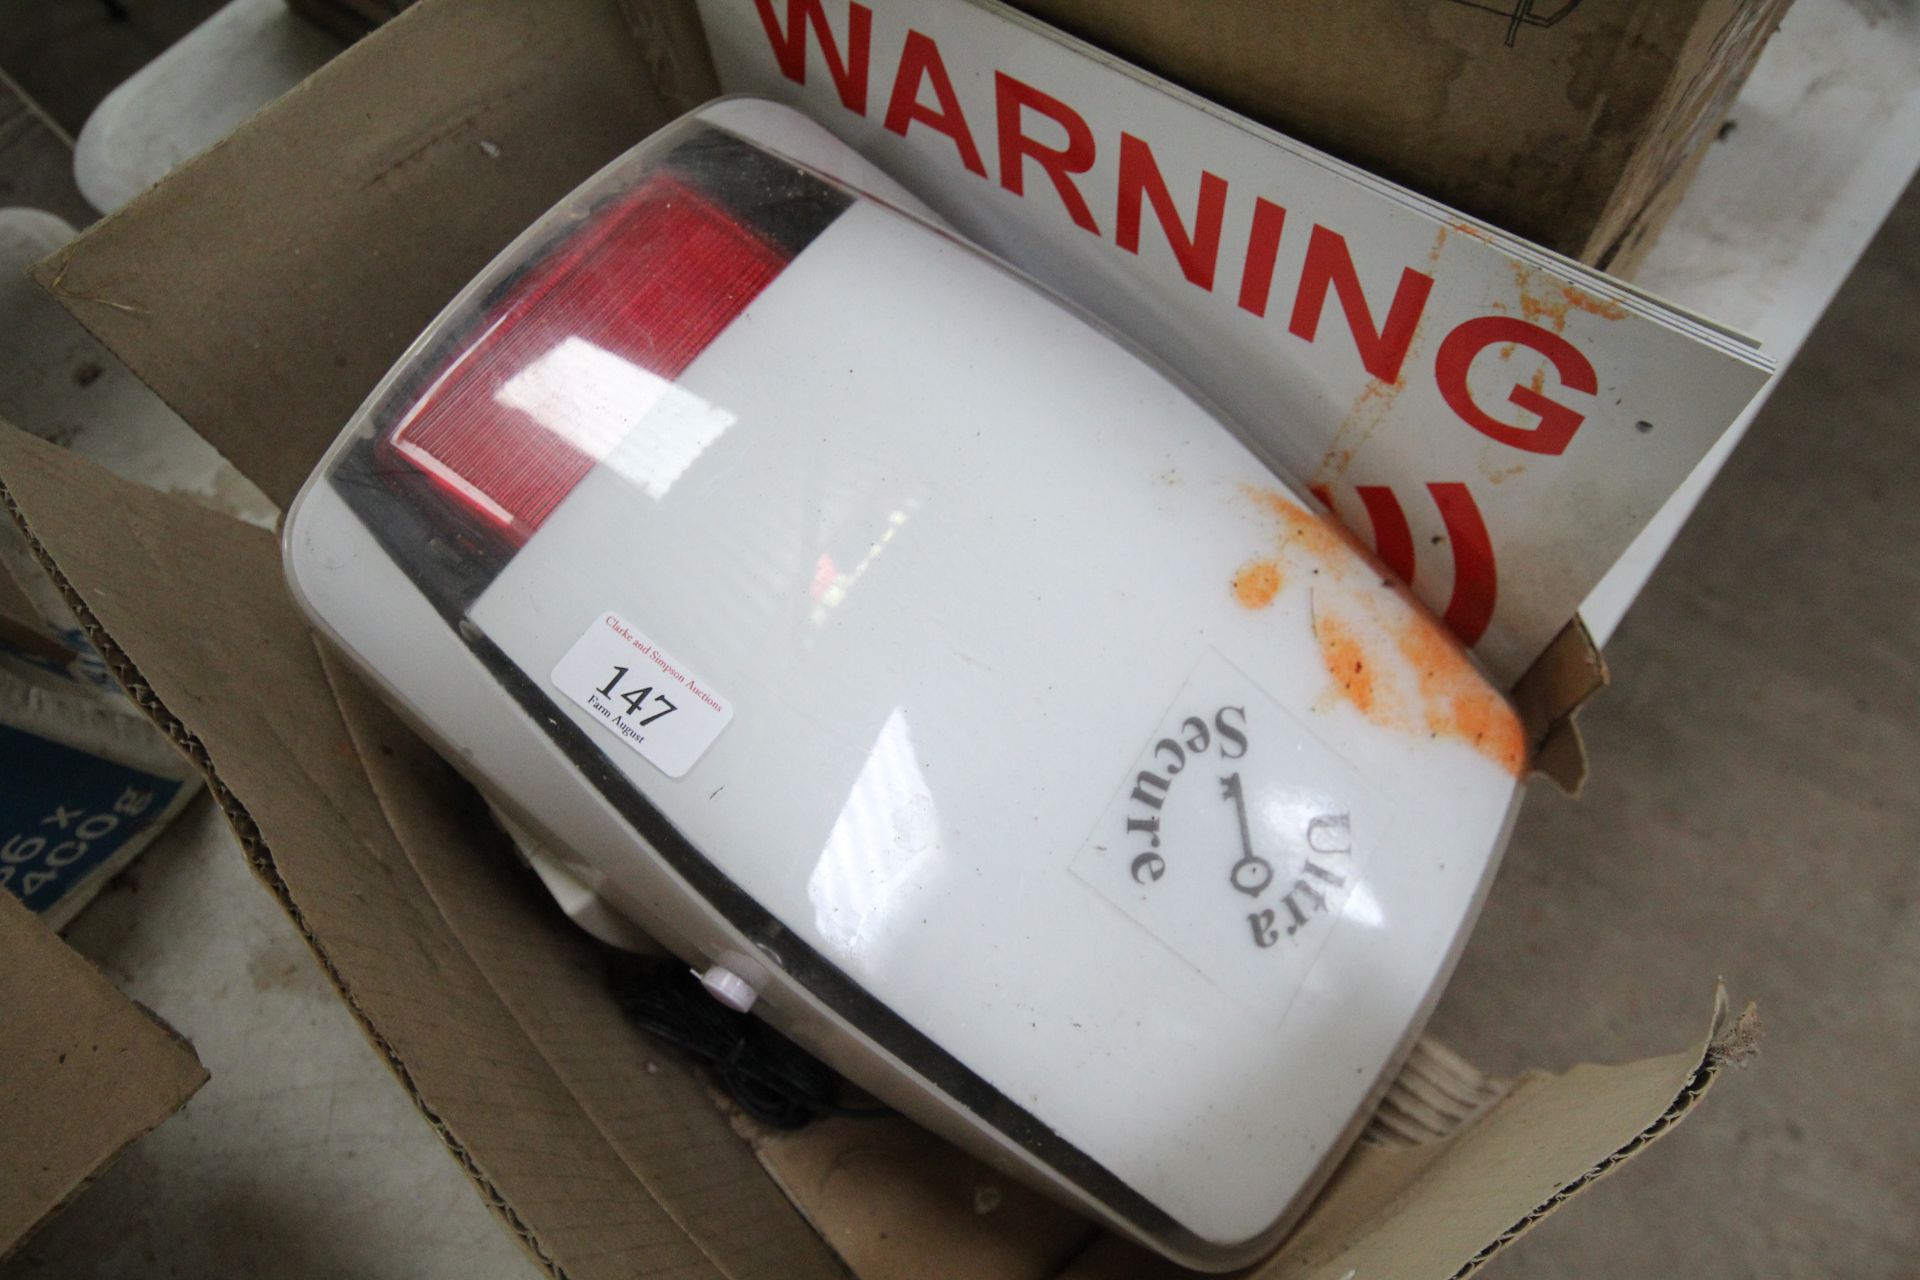 Infrared beam alarm system (as new). For sale due - Image 2 of 5